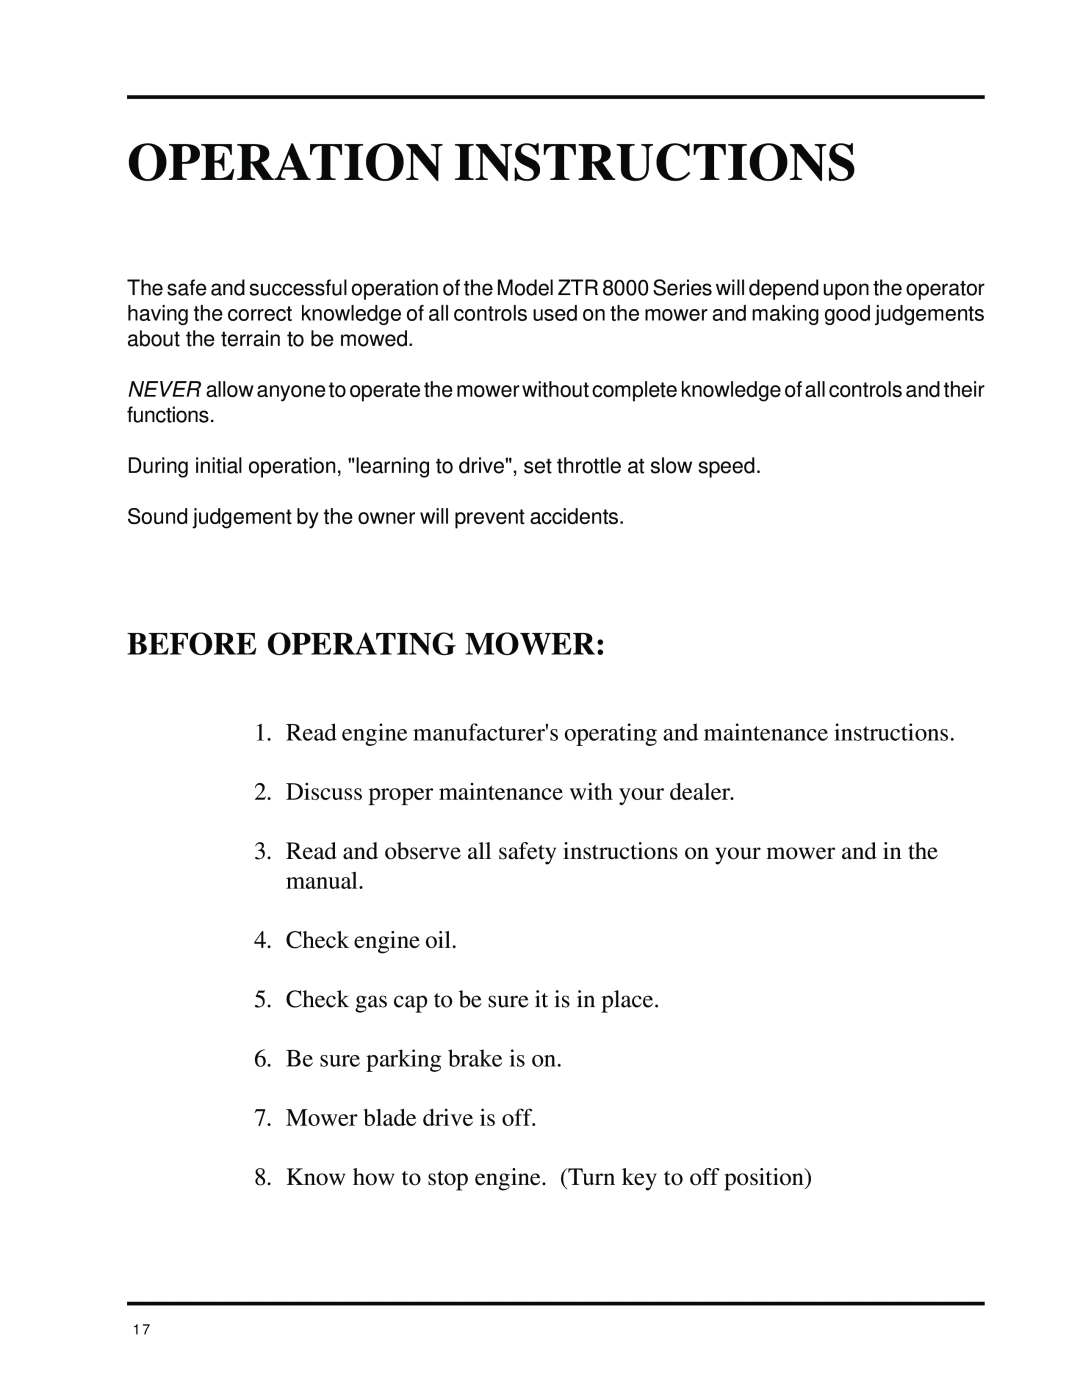 Dixon ZTR 8025 manual Operation Instructions, Before Operating Mower 